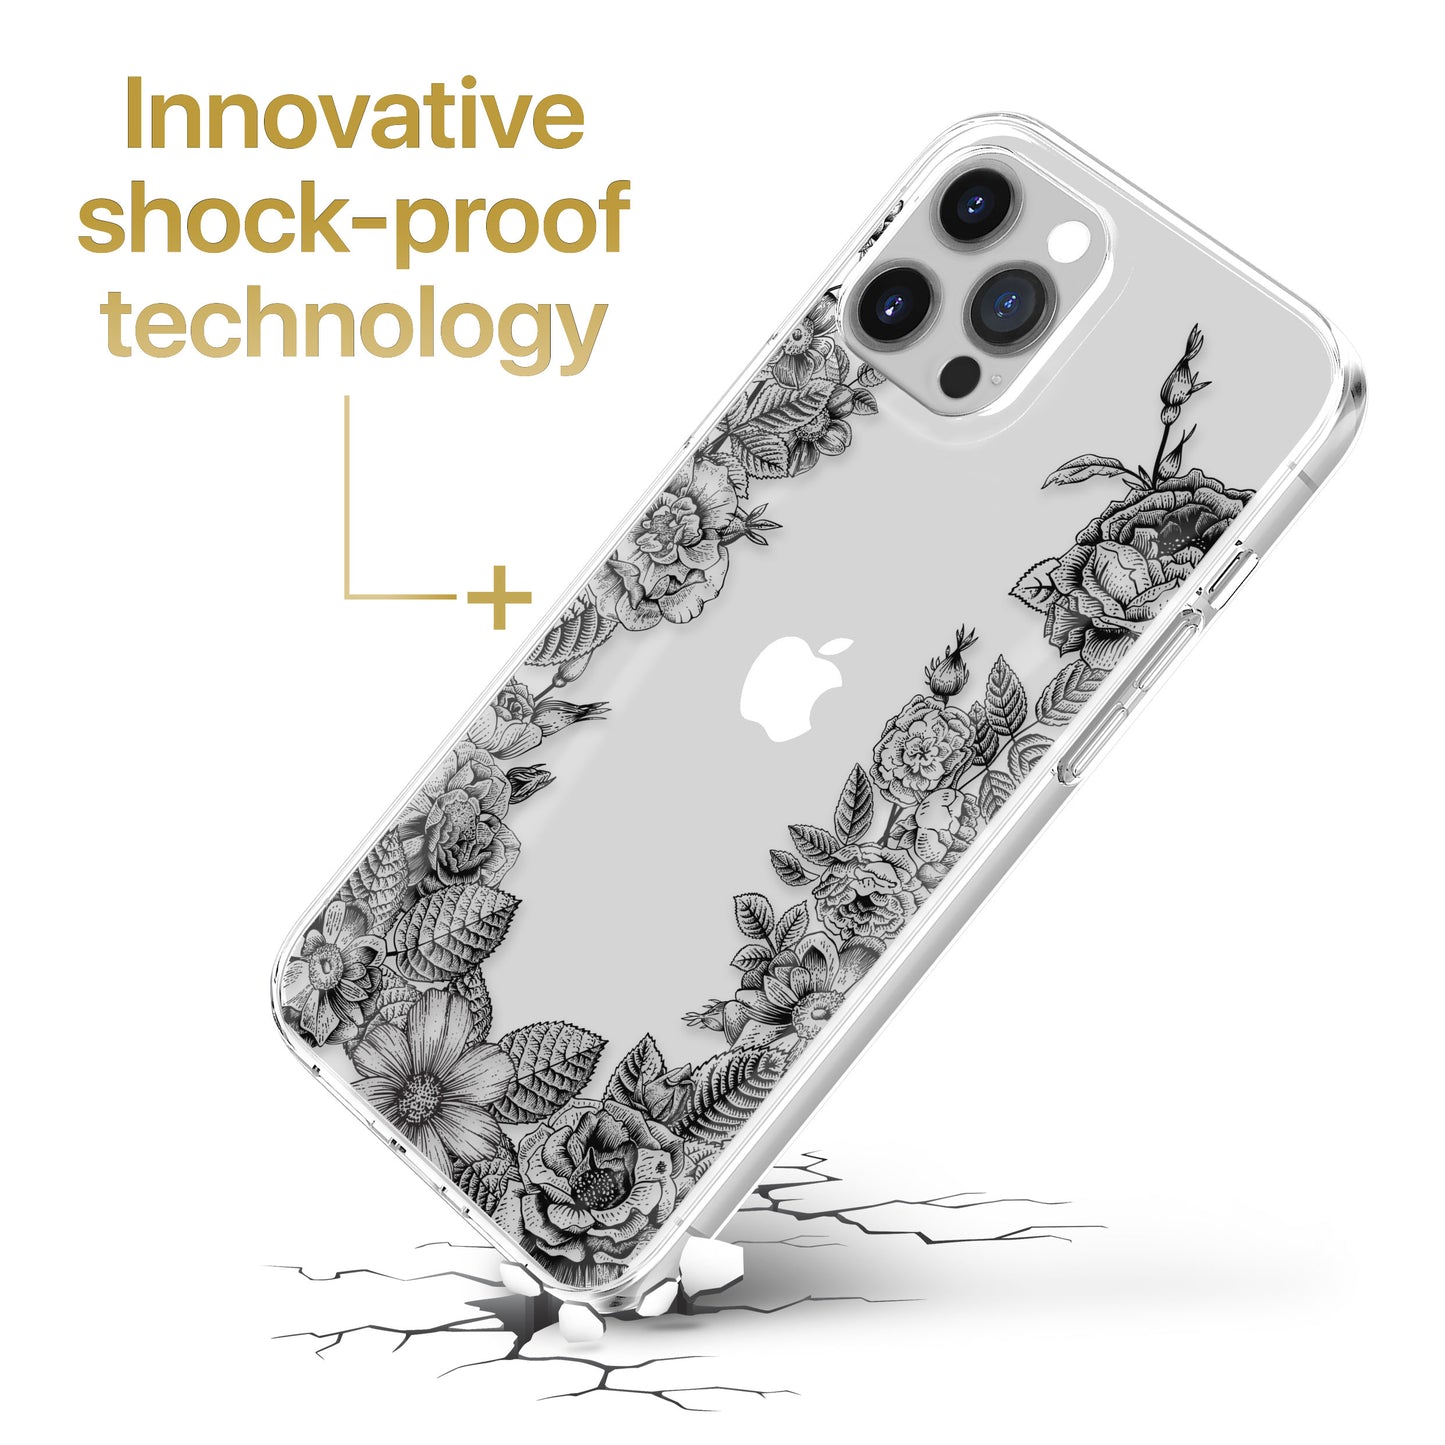 TPU Clear case with (Vintage Flowers) Design for iPhone & Samsung Phones